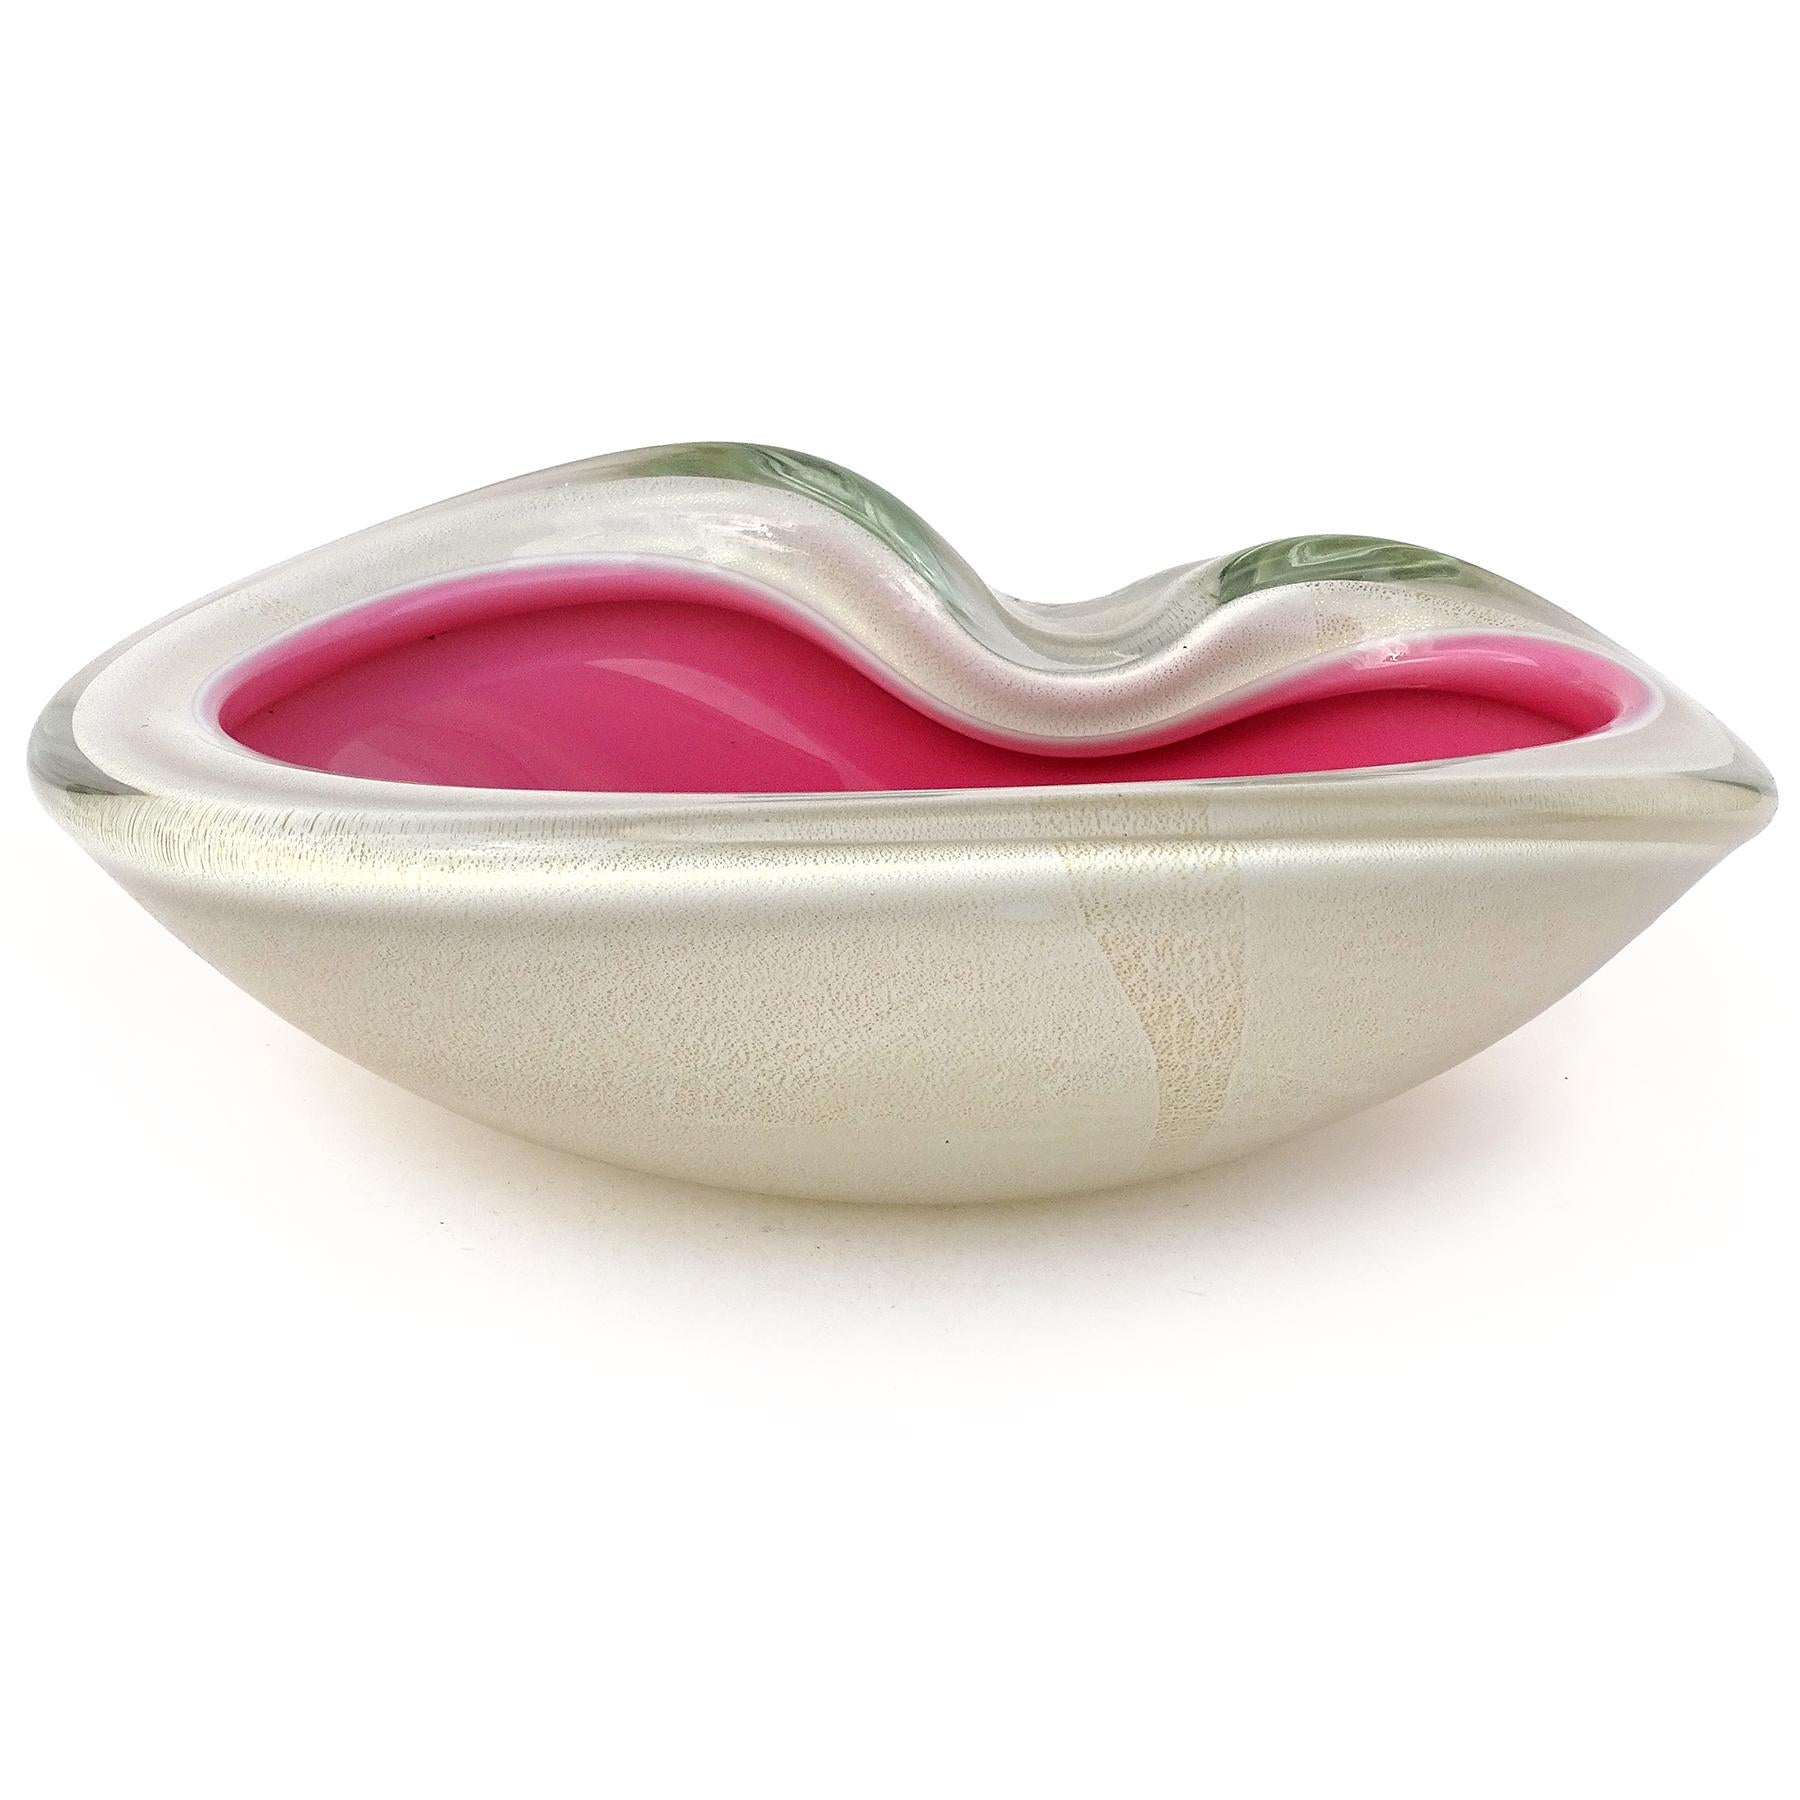 Beautiful vintage Murano hand blown pink and gold flecks over white Italian art glass decorative bowl. Attributed to designer Alfredo Barbini, circa 1950-60s. It has a thick folded over rim with biomorphic shape, and indent on the side that acts as